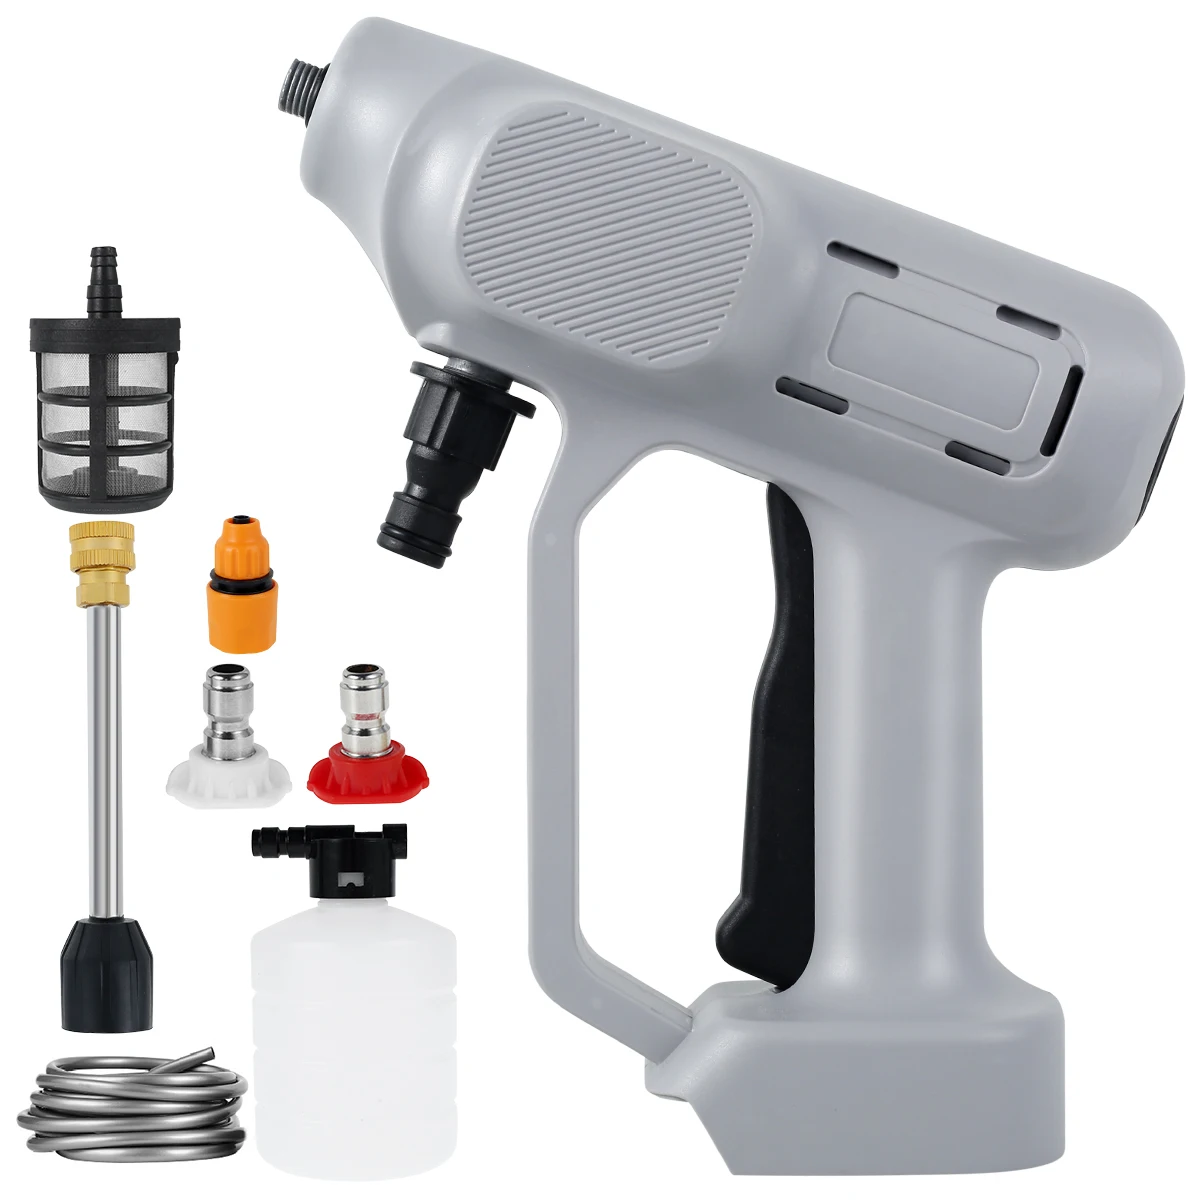 

Cordless Pressure Washer Machine Portable Car Wash Water Sprayer with Nozzle Filter and Connector 30BAR Water Pressure